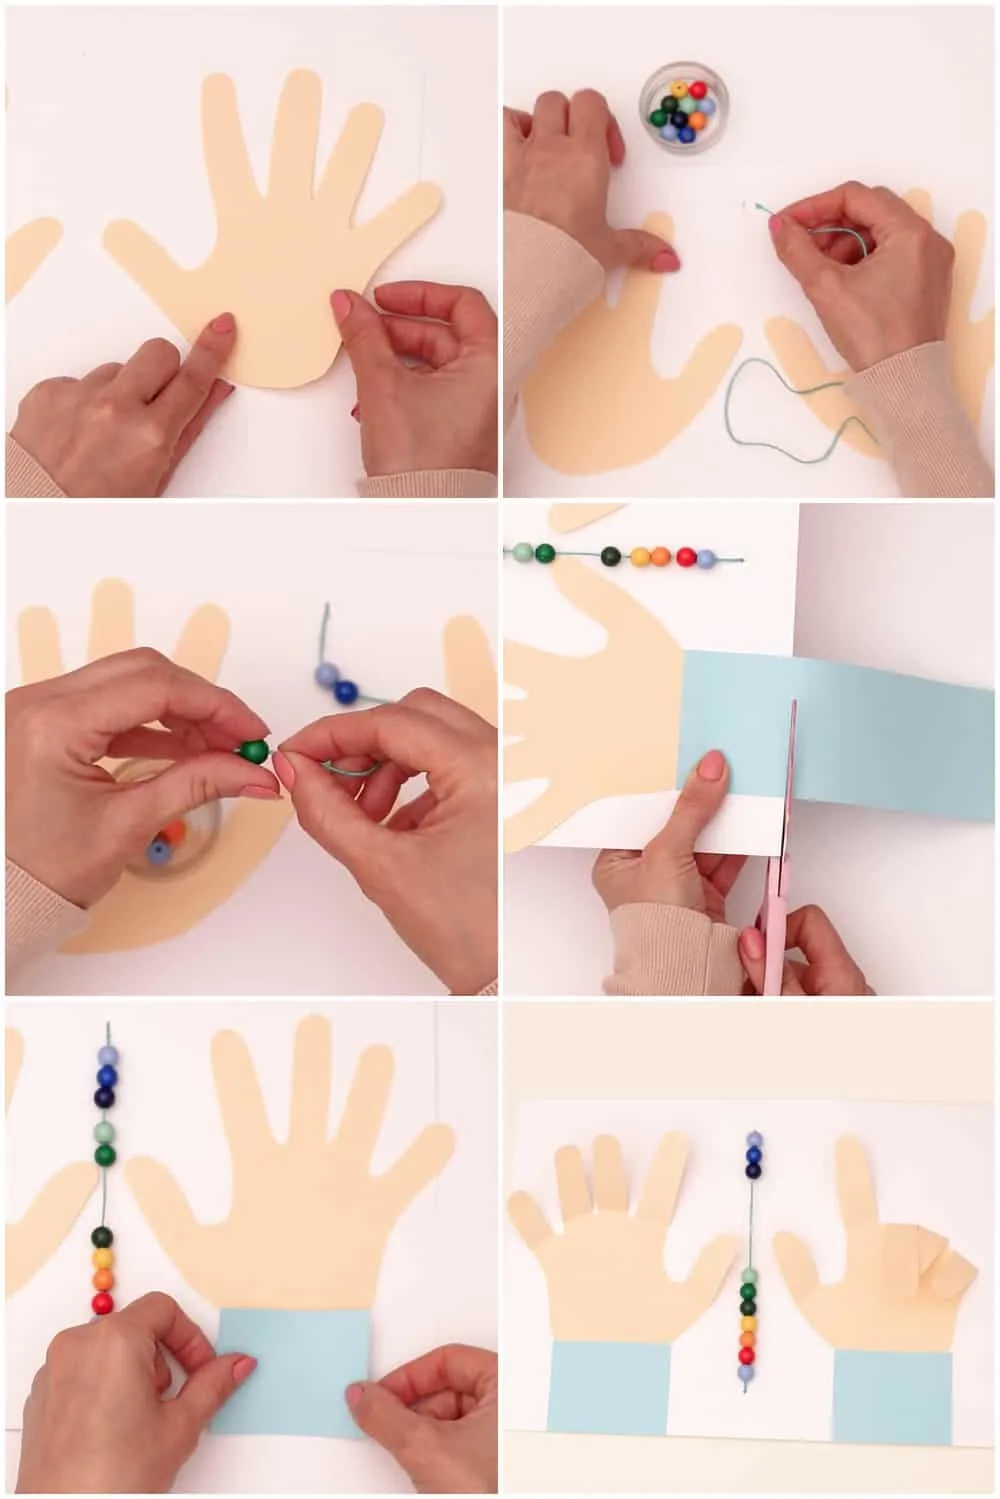 Process to make early number and math learning with paper hands cut out and counting beads 